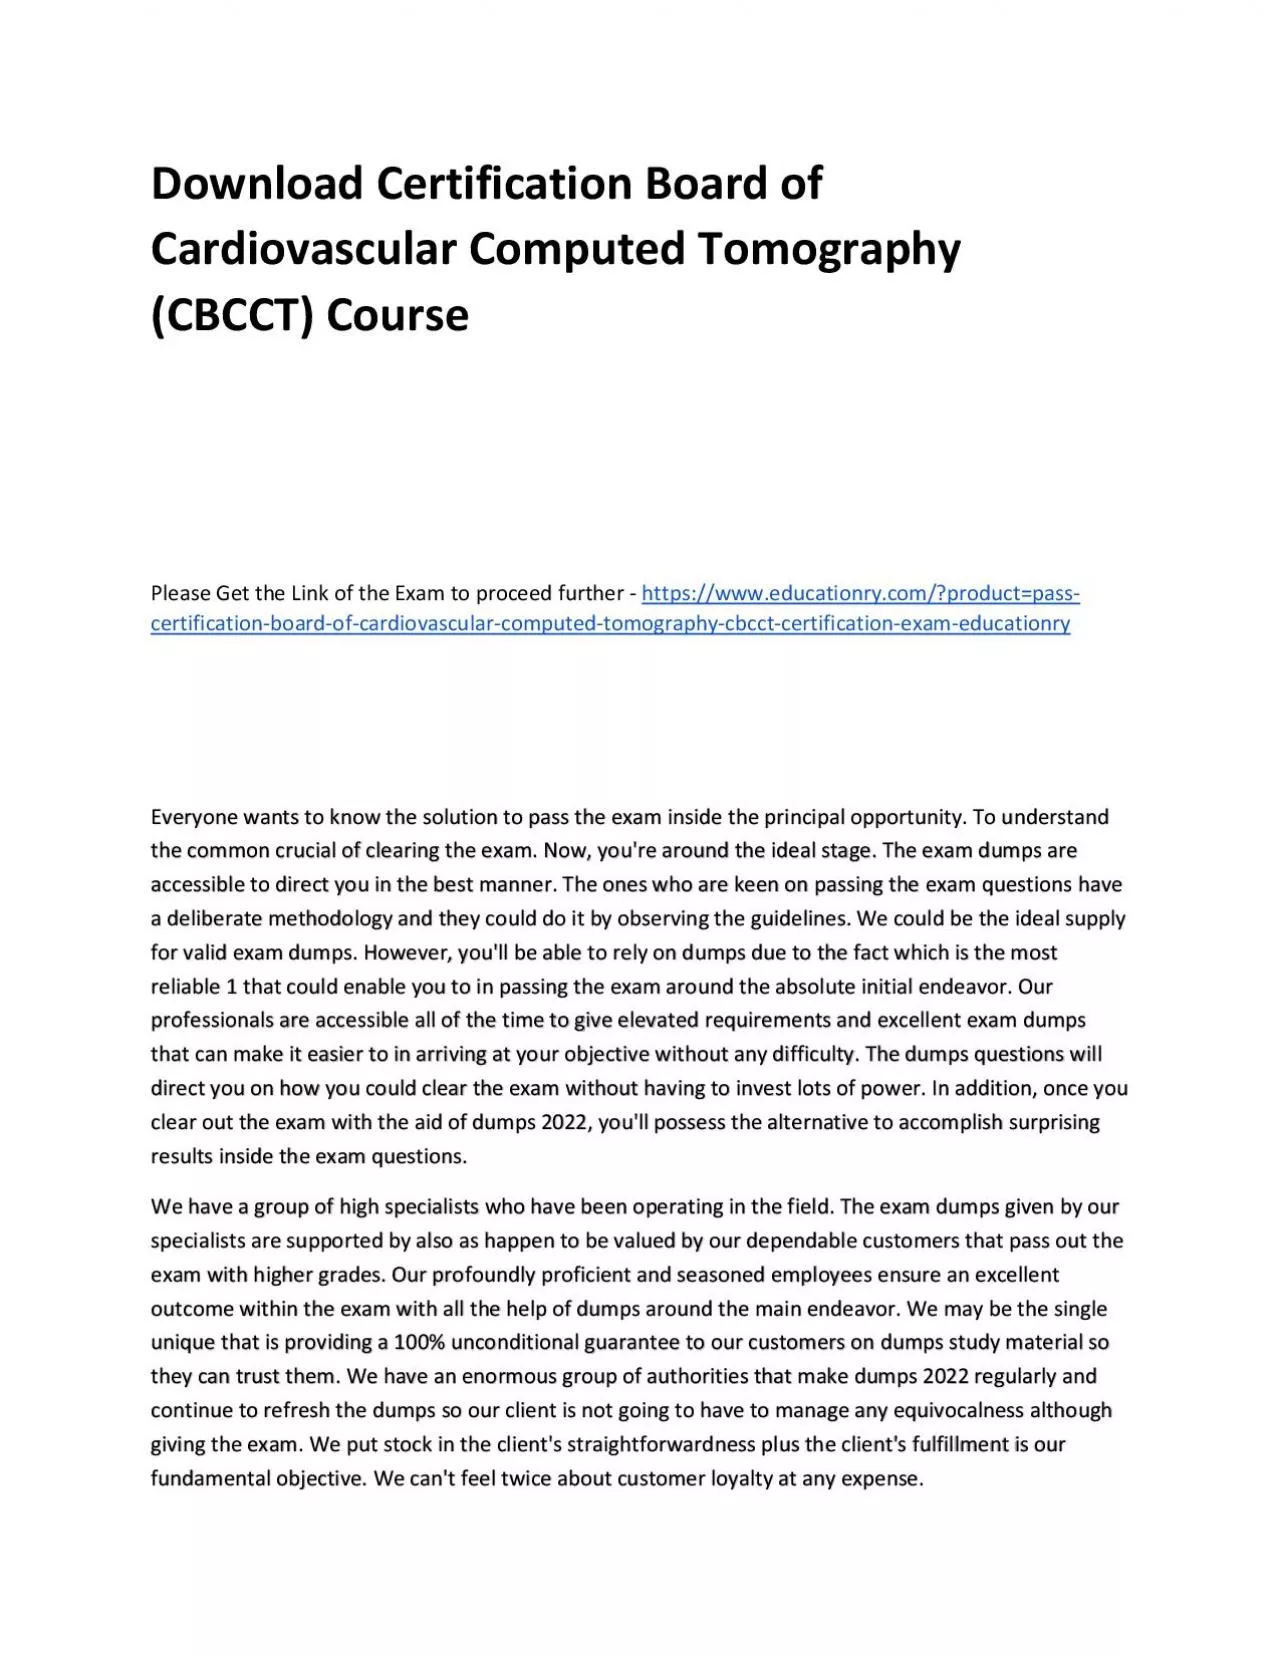 Download Certification Board of Cardiovascular Computed Tomography (CBCCT) Practice Course